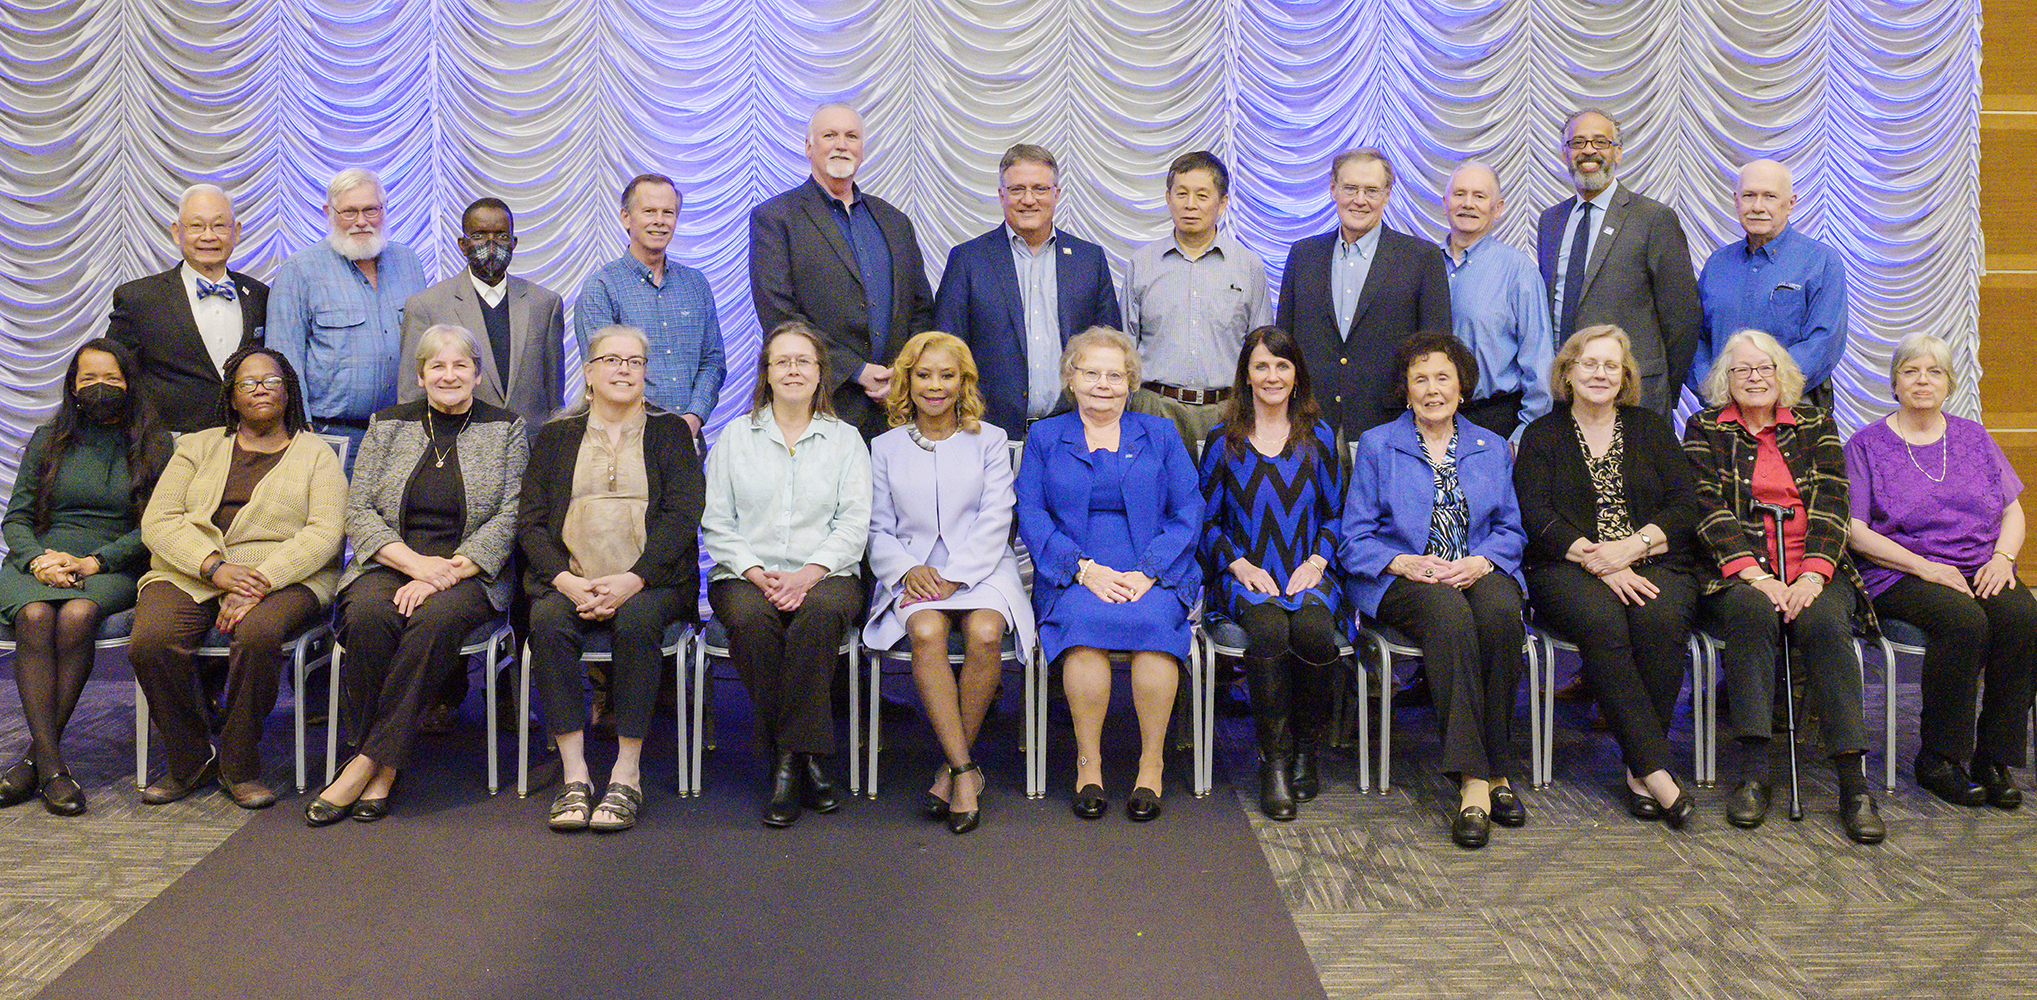 MTSU Provost Mark Byrnes, standing at the center of the back row, joins 22 of the university’s 75 employees retiring in the 2021-22 academic year for a photo at the university’s annual Retired Employee Reception April 6 in the Student Union Ballroom. The 75 retiring employees honored this year have a combined 1,959 years of service to the university. (MTSU photo by Andy Heidt)